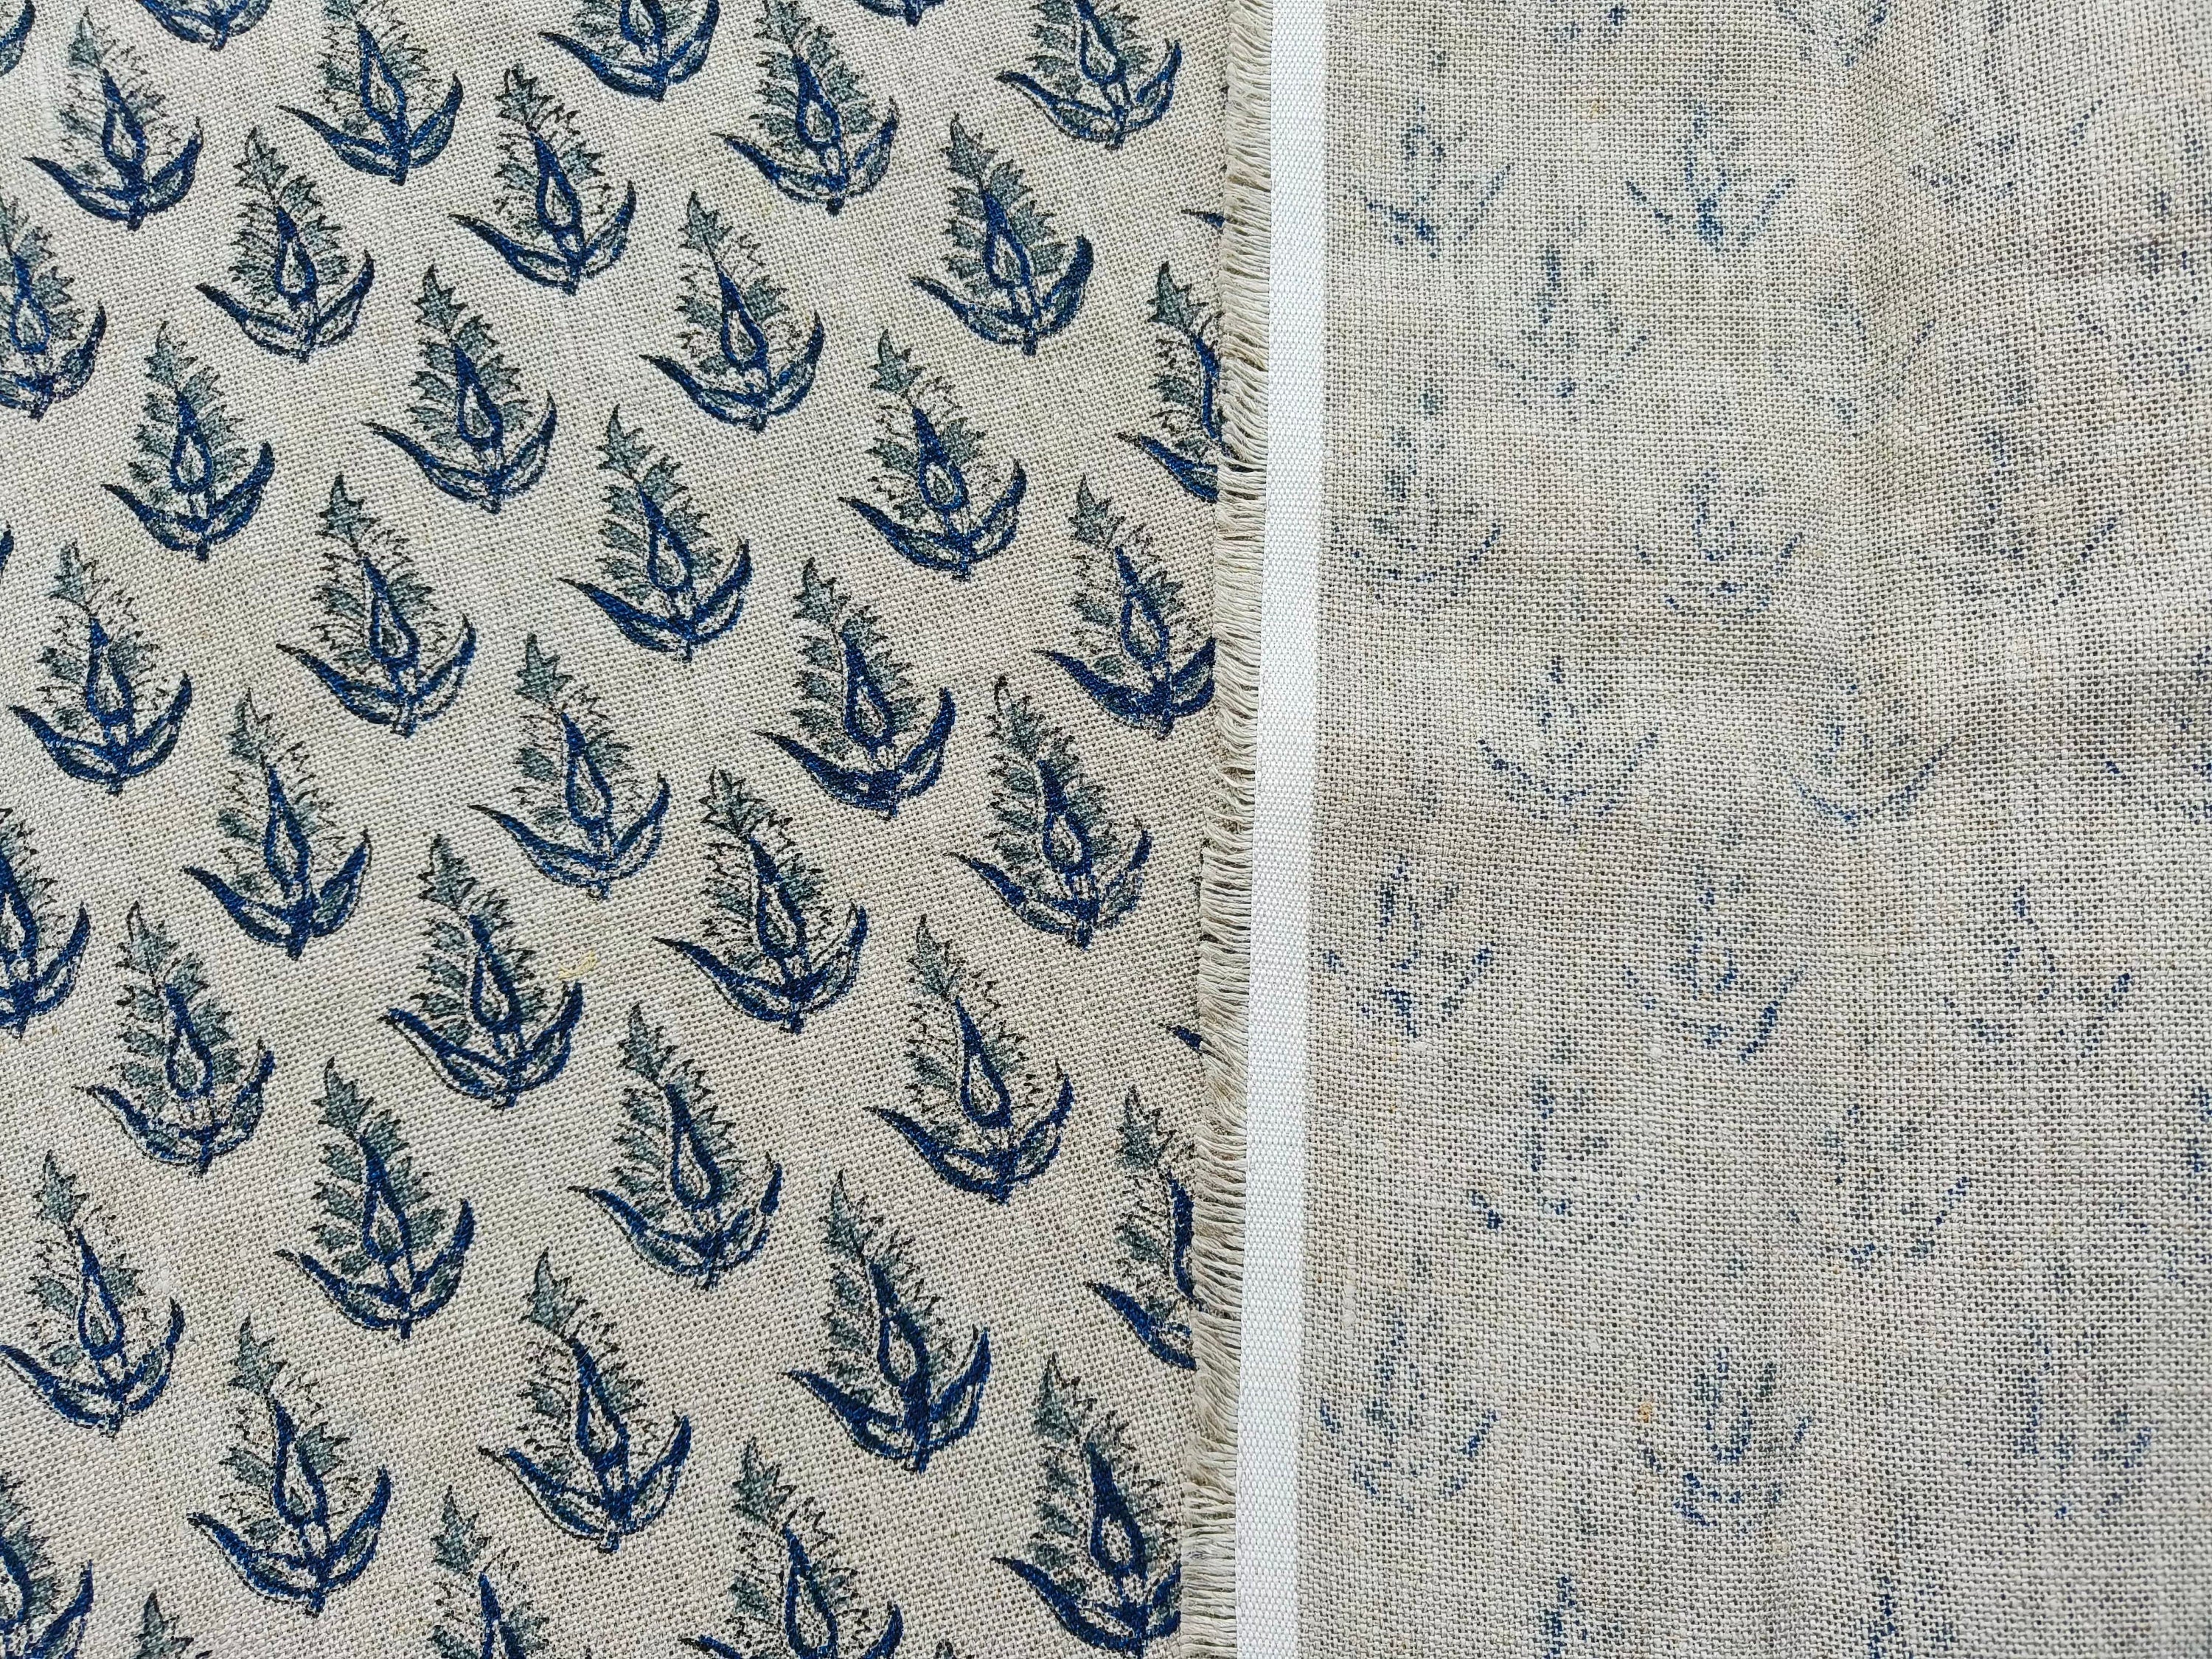 Kanak Buti  Best Fabric For Cushion Cover Heavy Weight Linen Natural Linen By The Yard  Home Decor Fabric  Hand Block Print Fabric